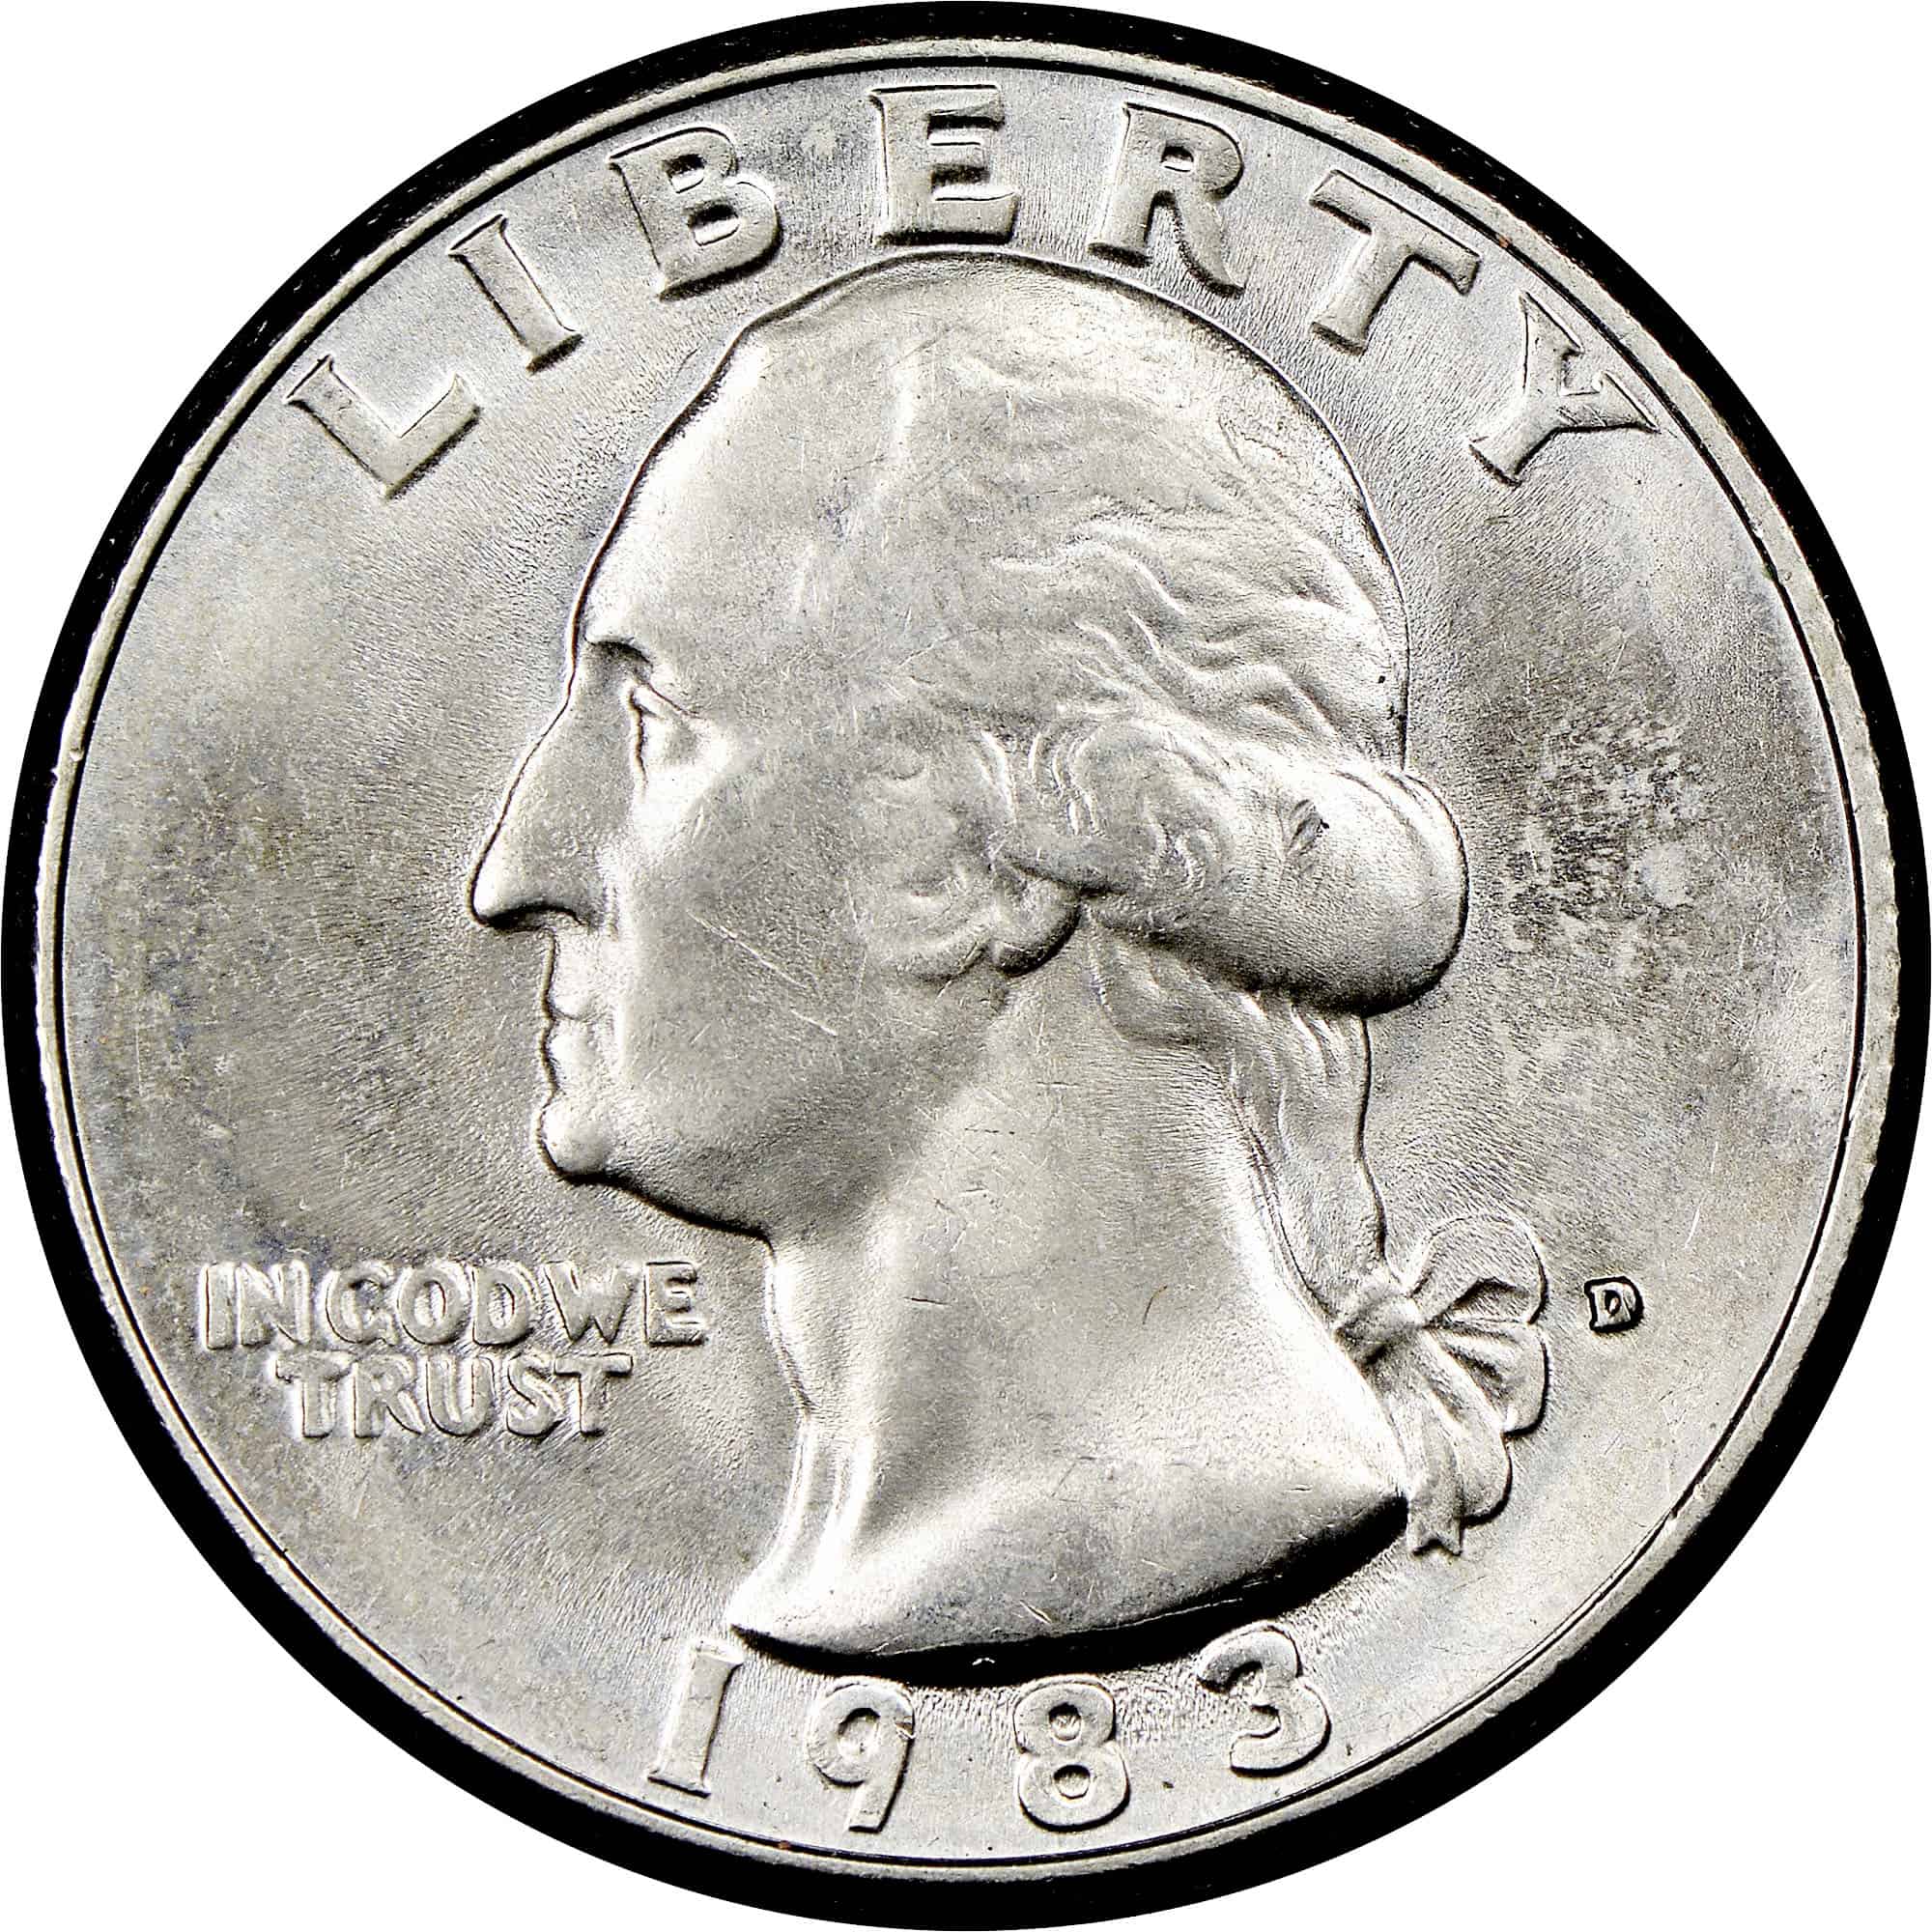 The Obverse of the 1983 Quarter